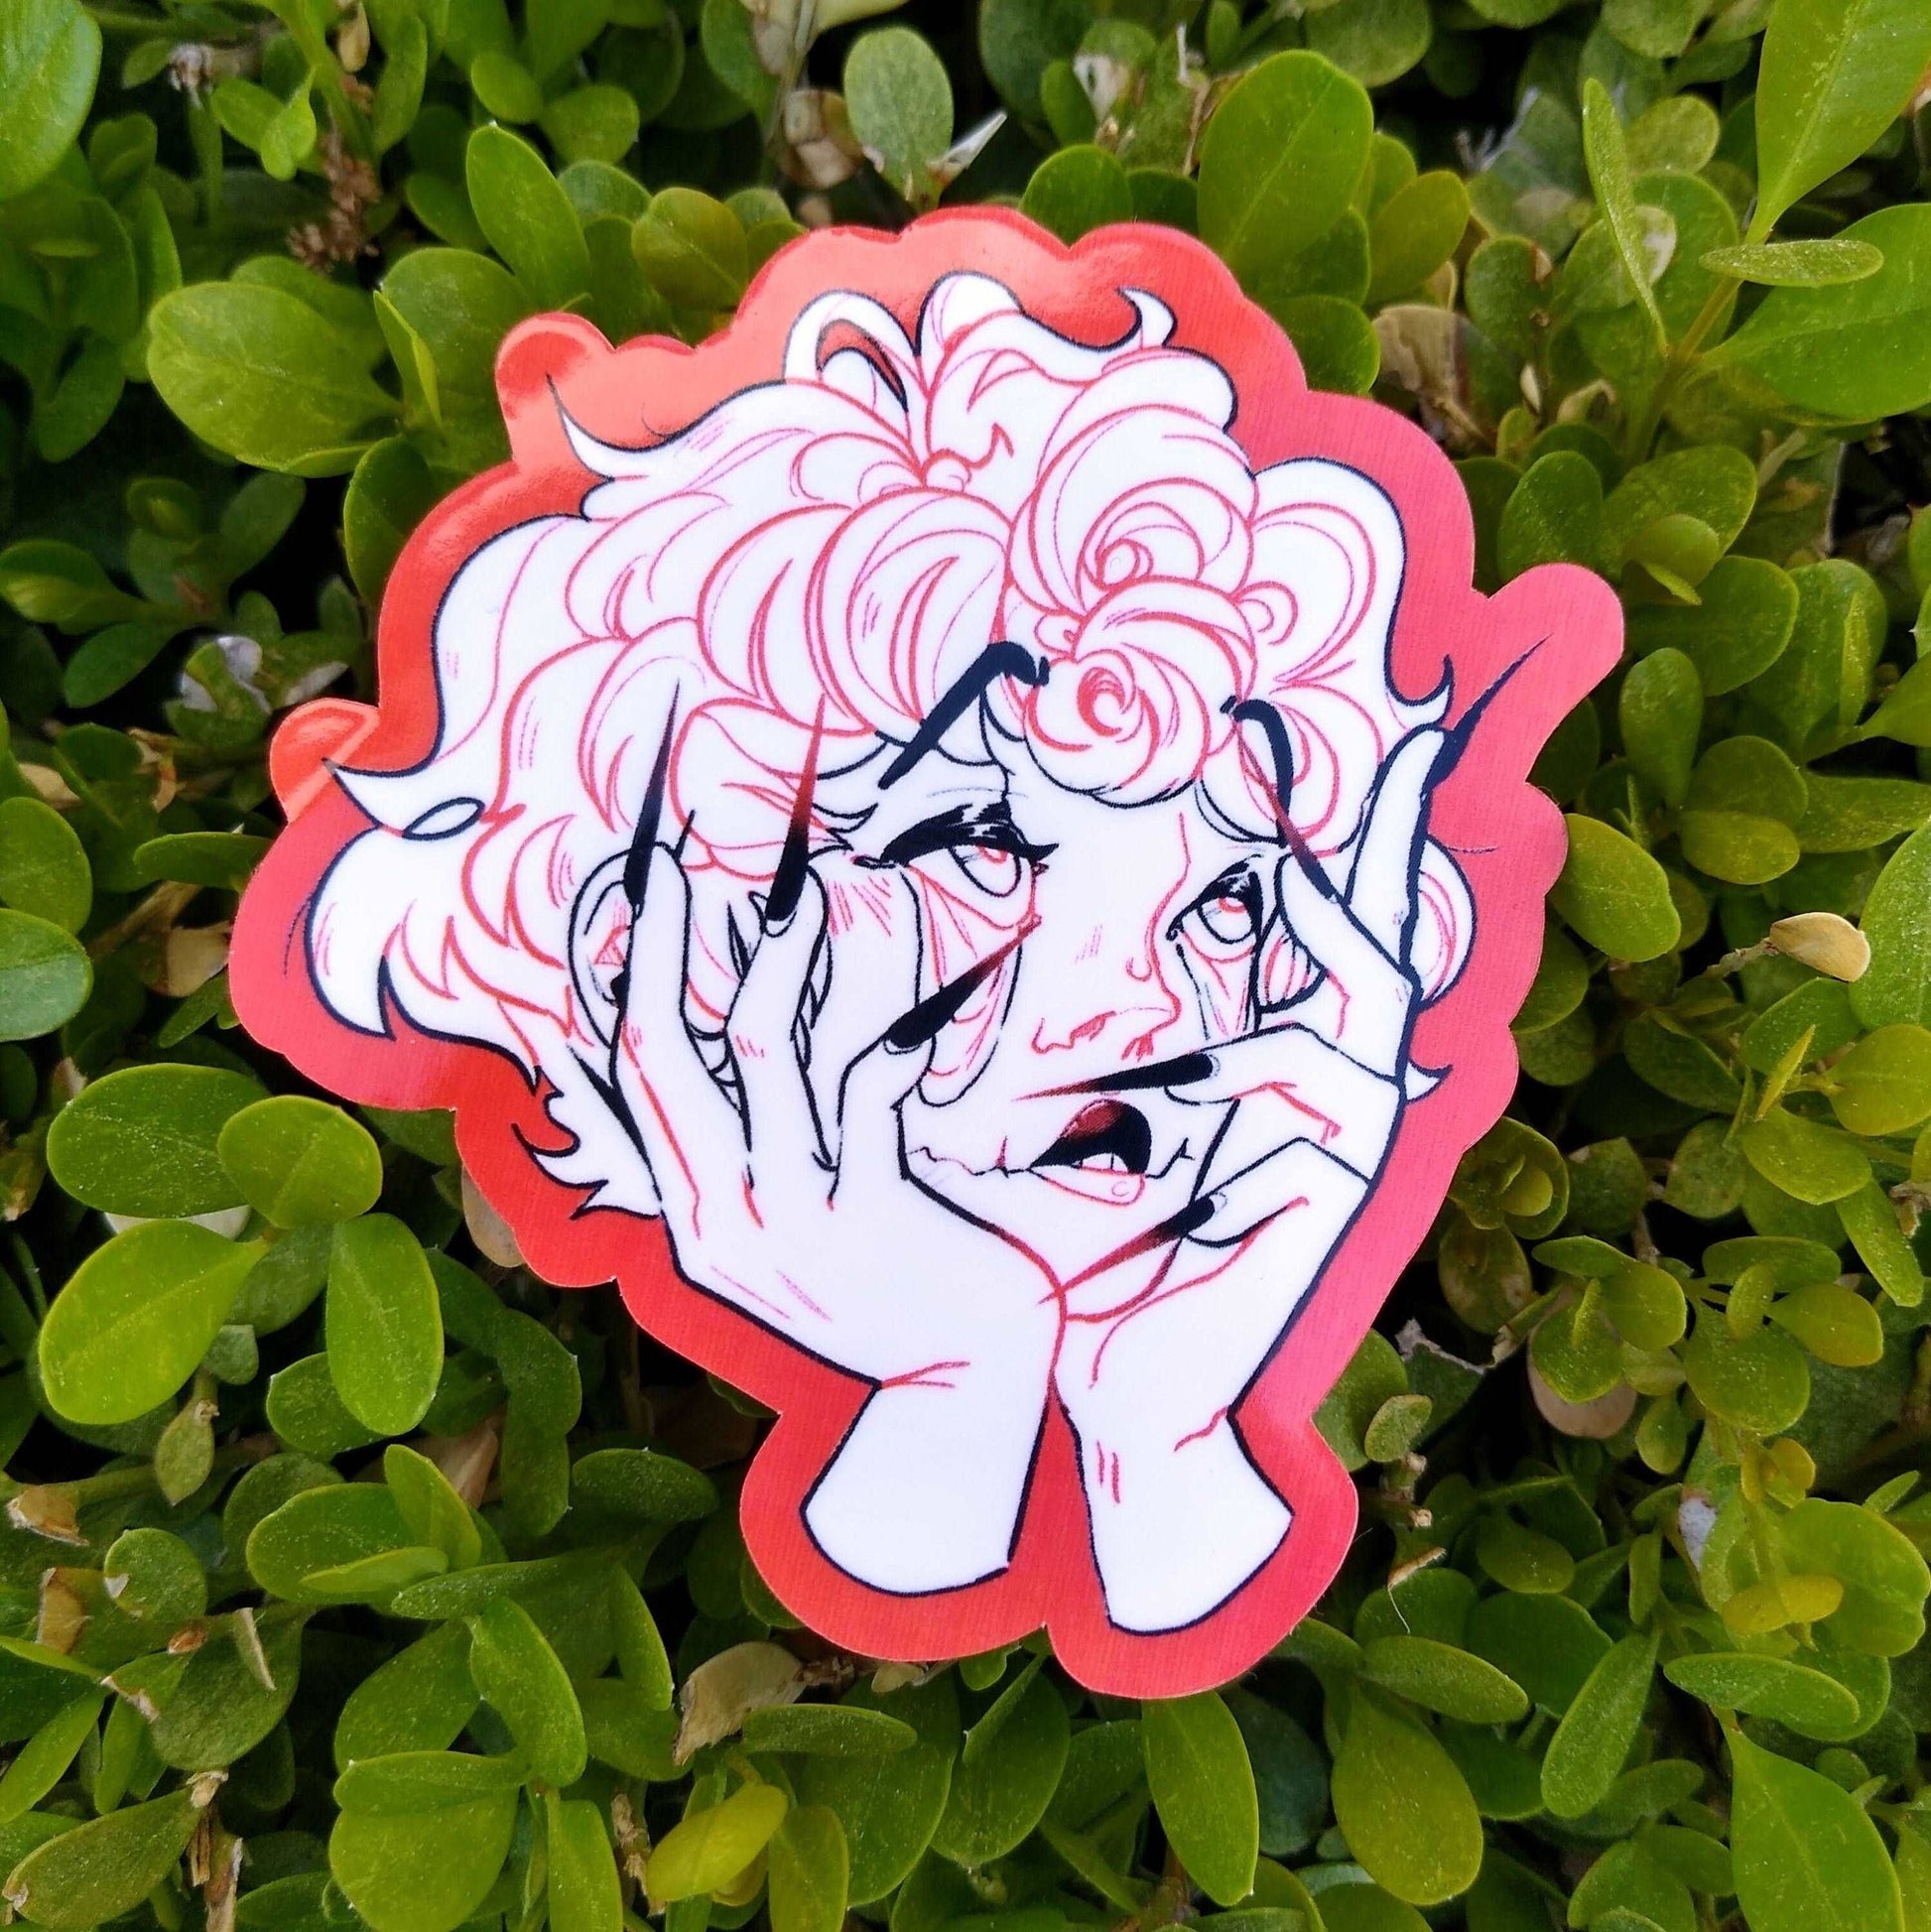 Red Droopy Eye Girl Sticker!